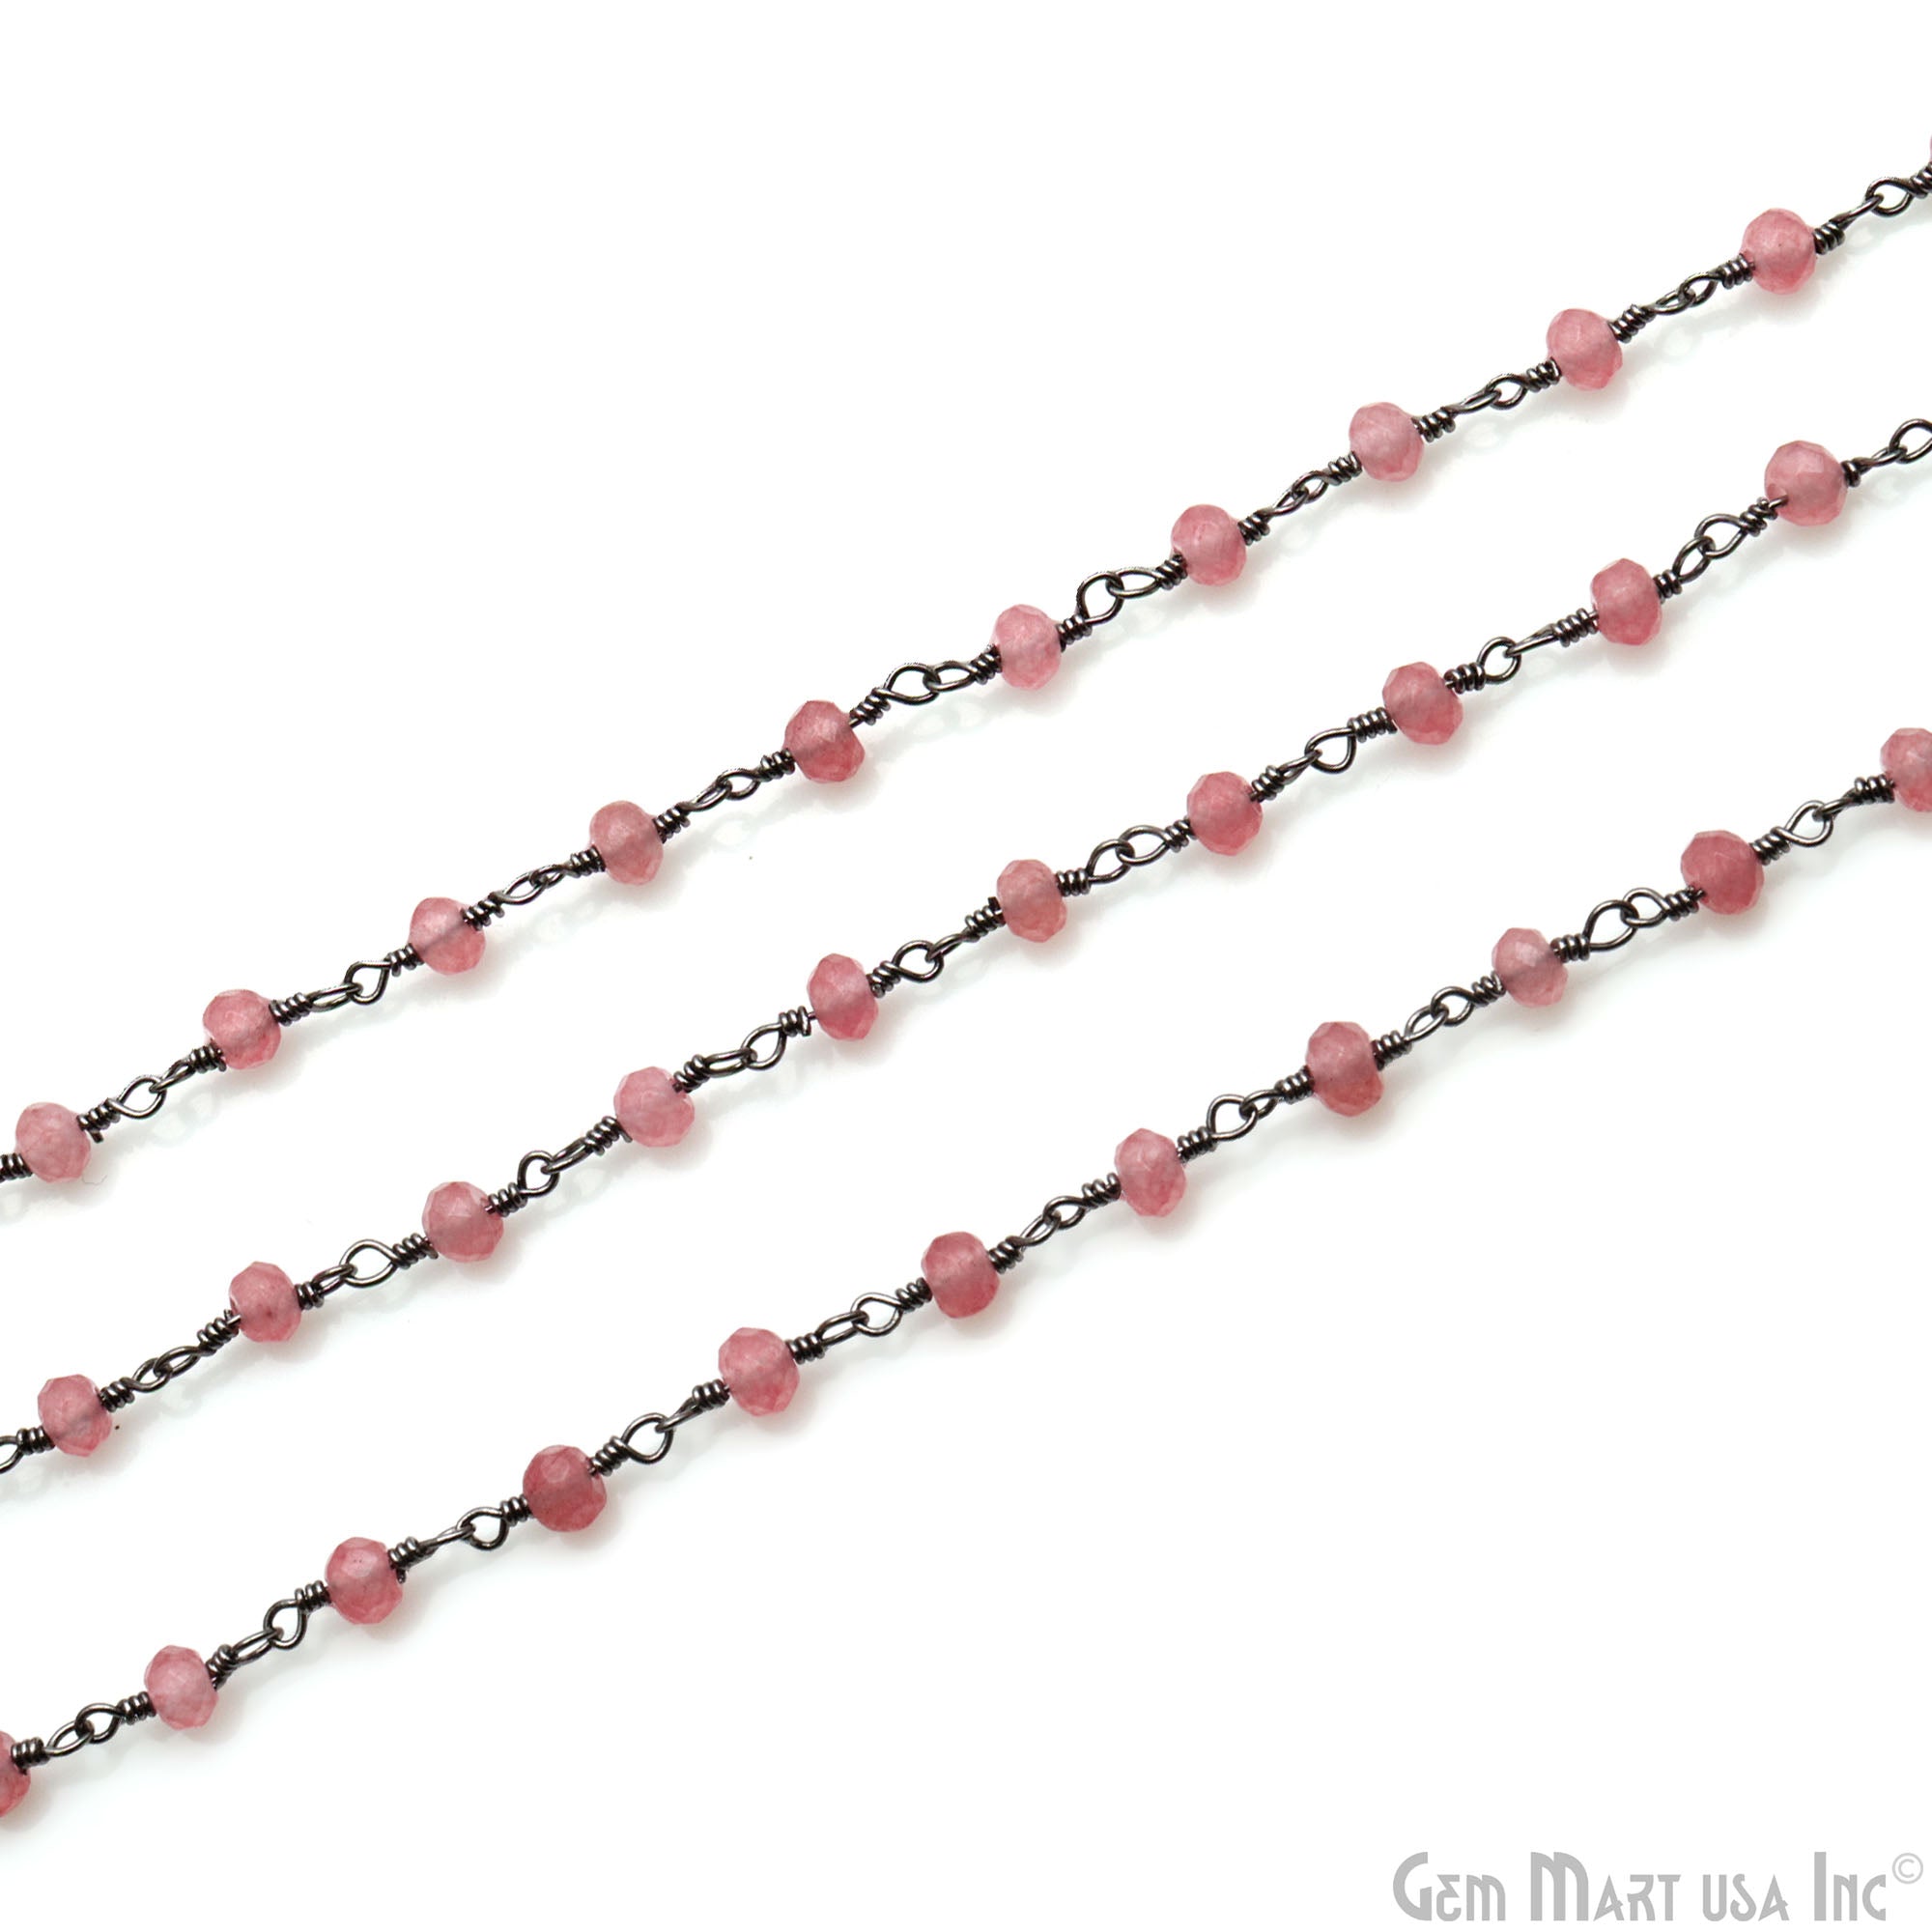 Pink Jade 4mm Faceted Beads Oxidized Wire Wrapped Rosary Chain